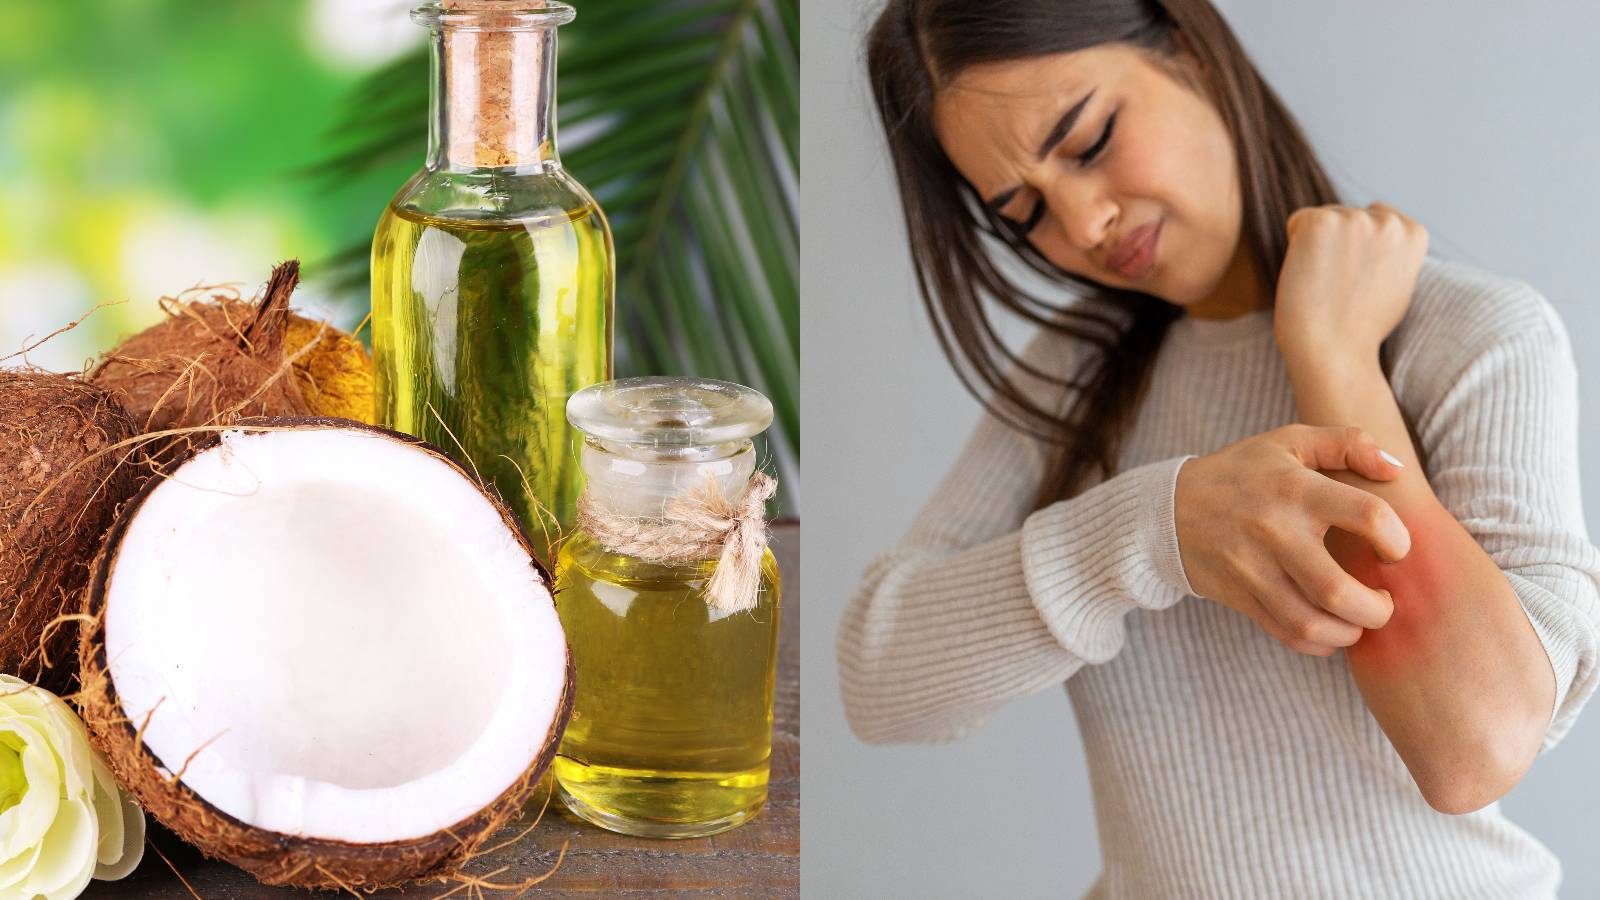 Coconut oil: Is it an effective home remedy for psoriasis?